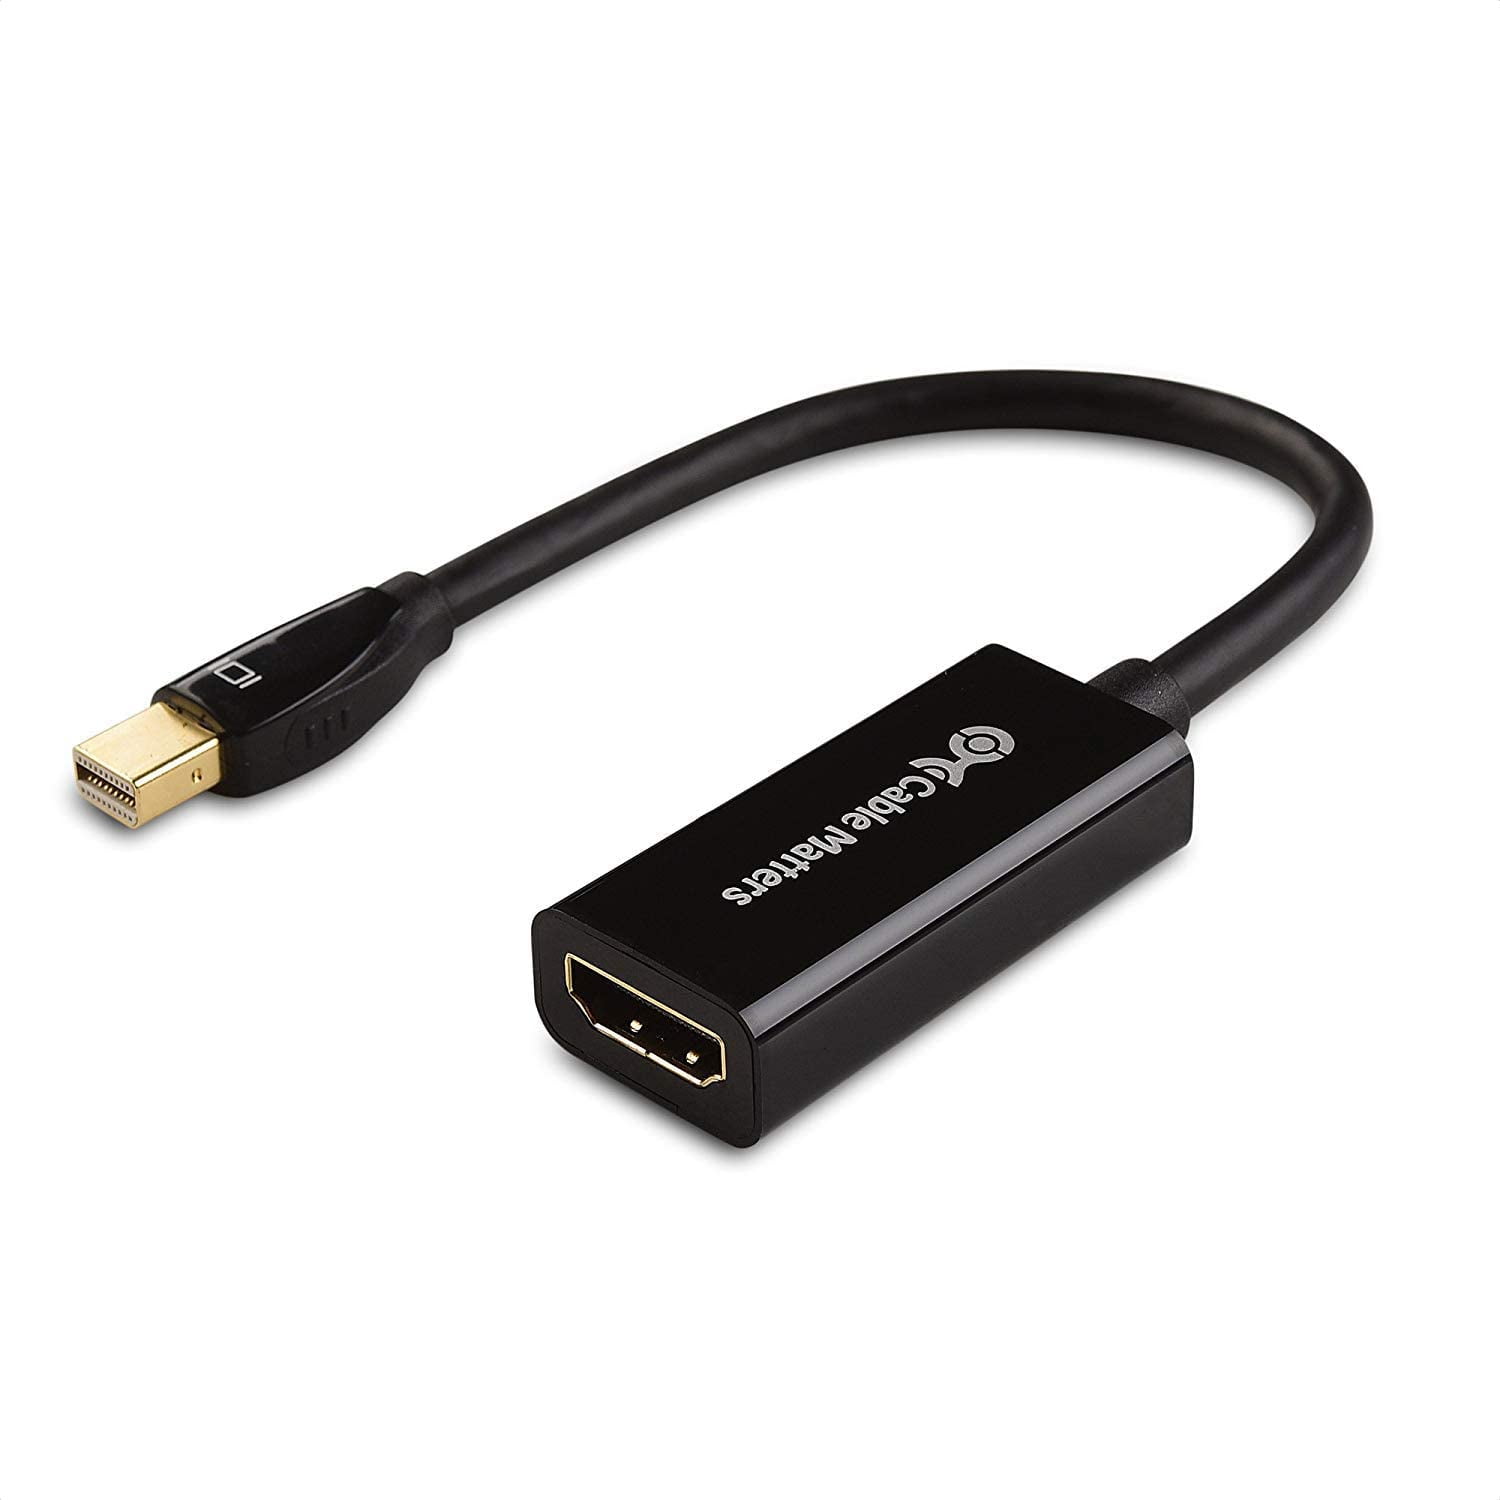 SimYoung Thunderbolt Mini Display Port to HDMI Cable for Apple iMac MacBook Air Pro 6FT Black 